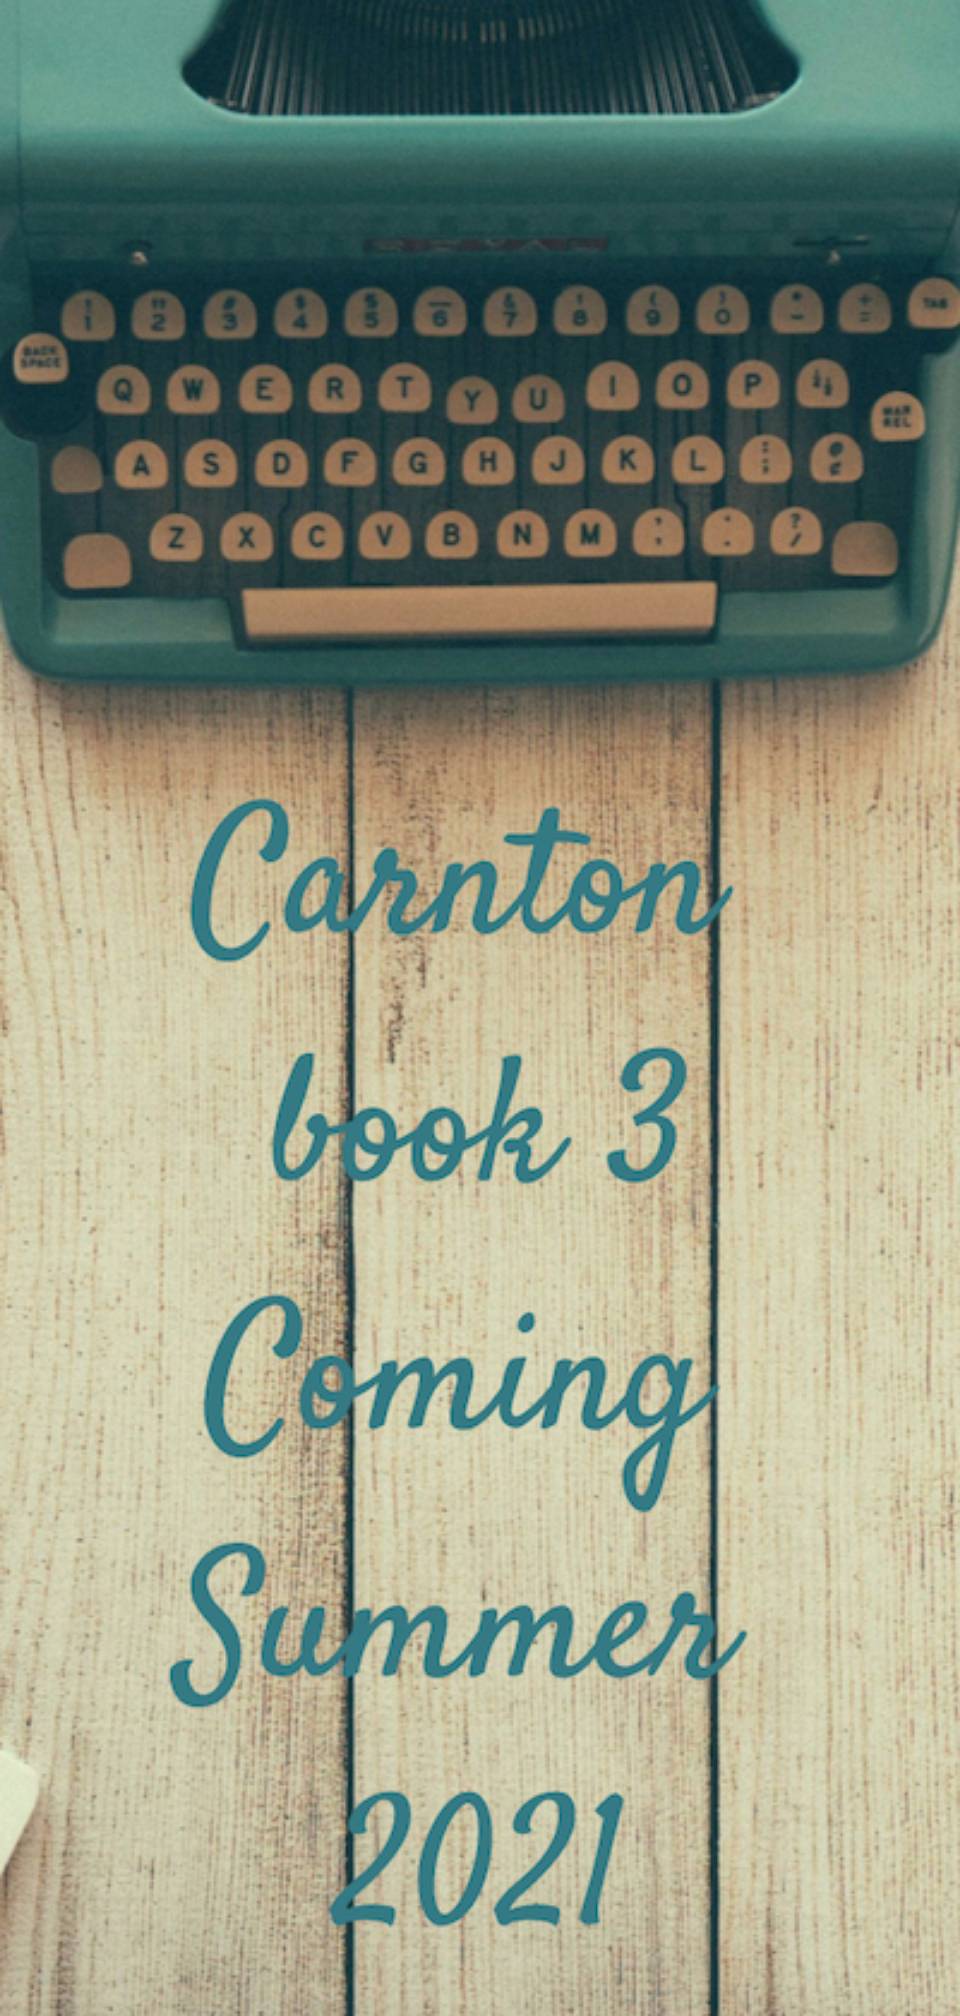 the third (and final) full-length Carnton novel (coming Summer 2021)